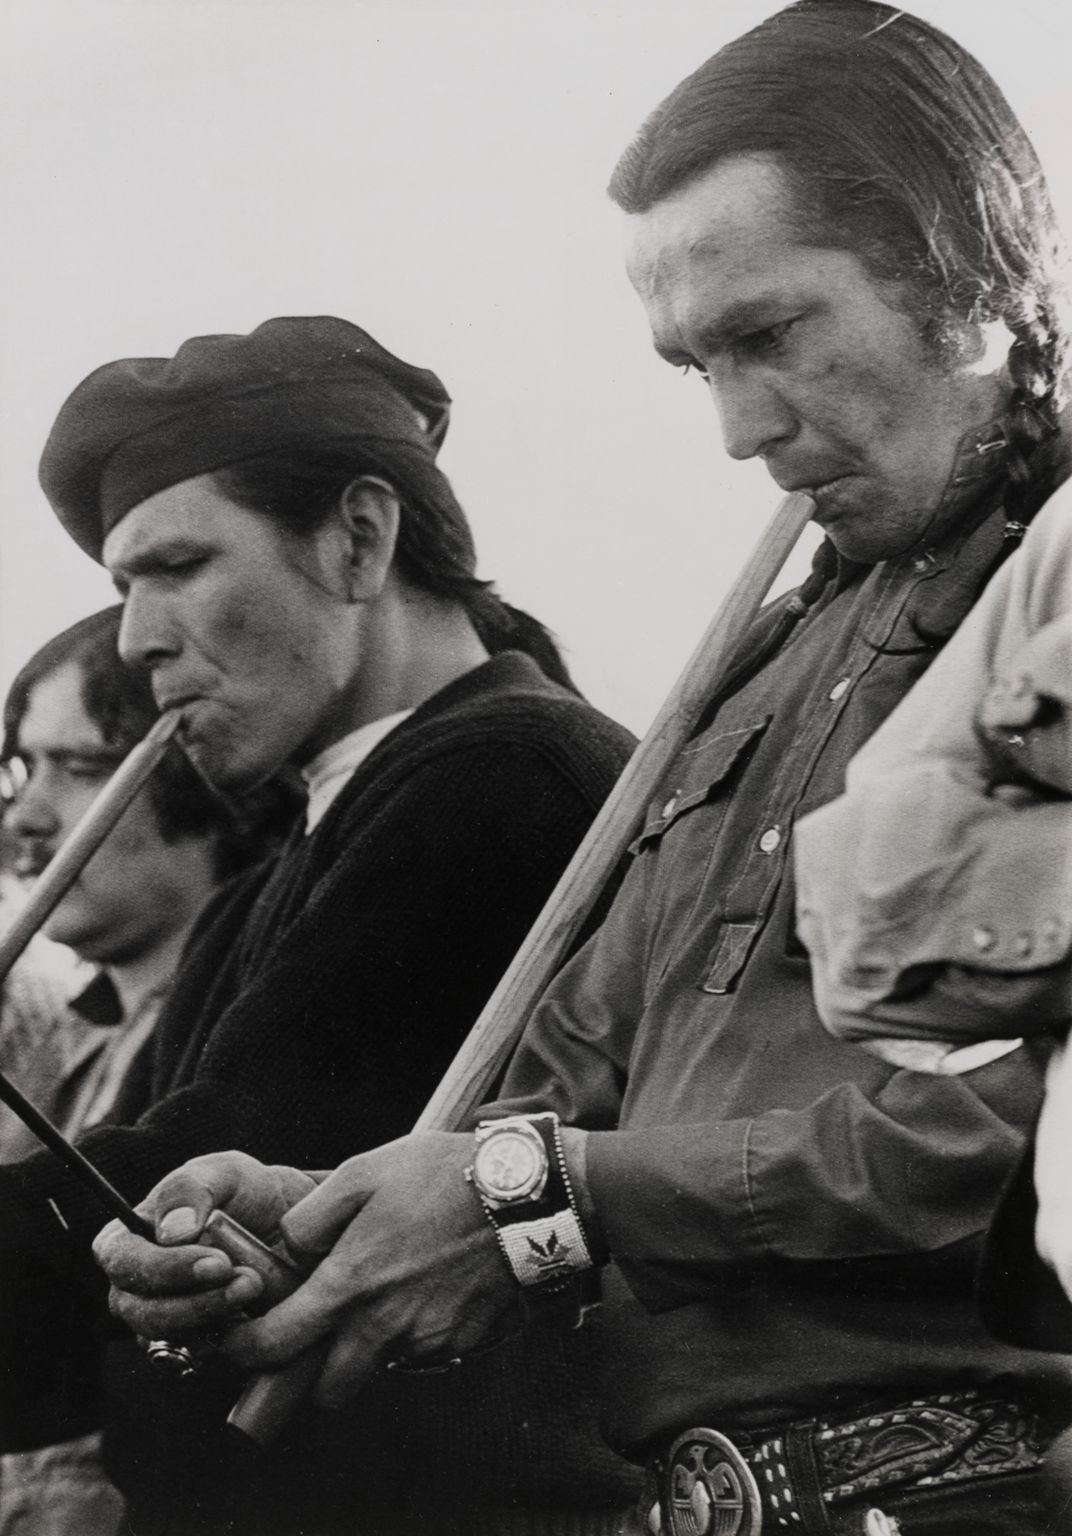 Russell Means and Dennis Banks, 1973